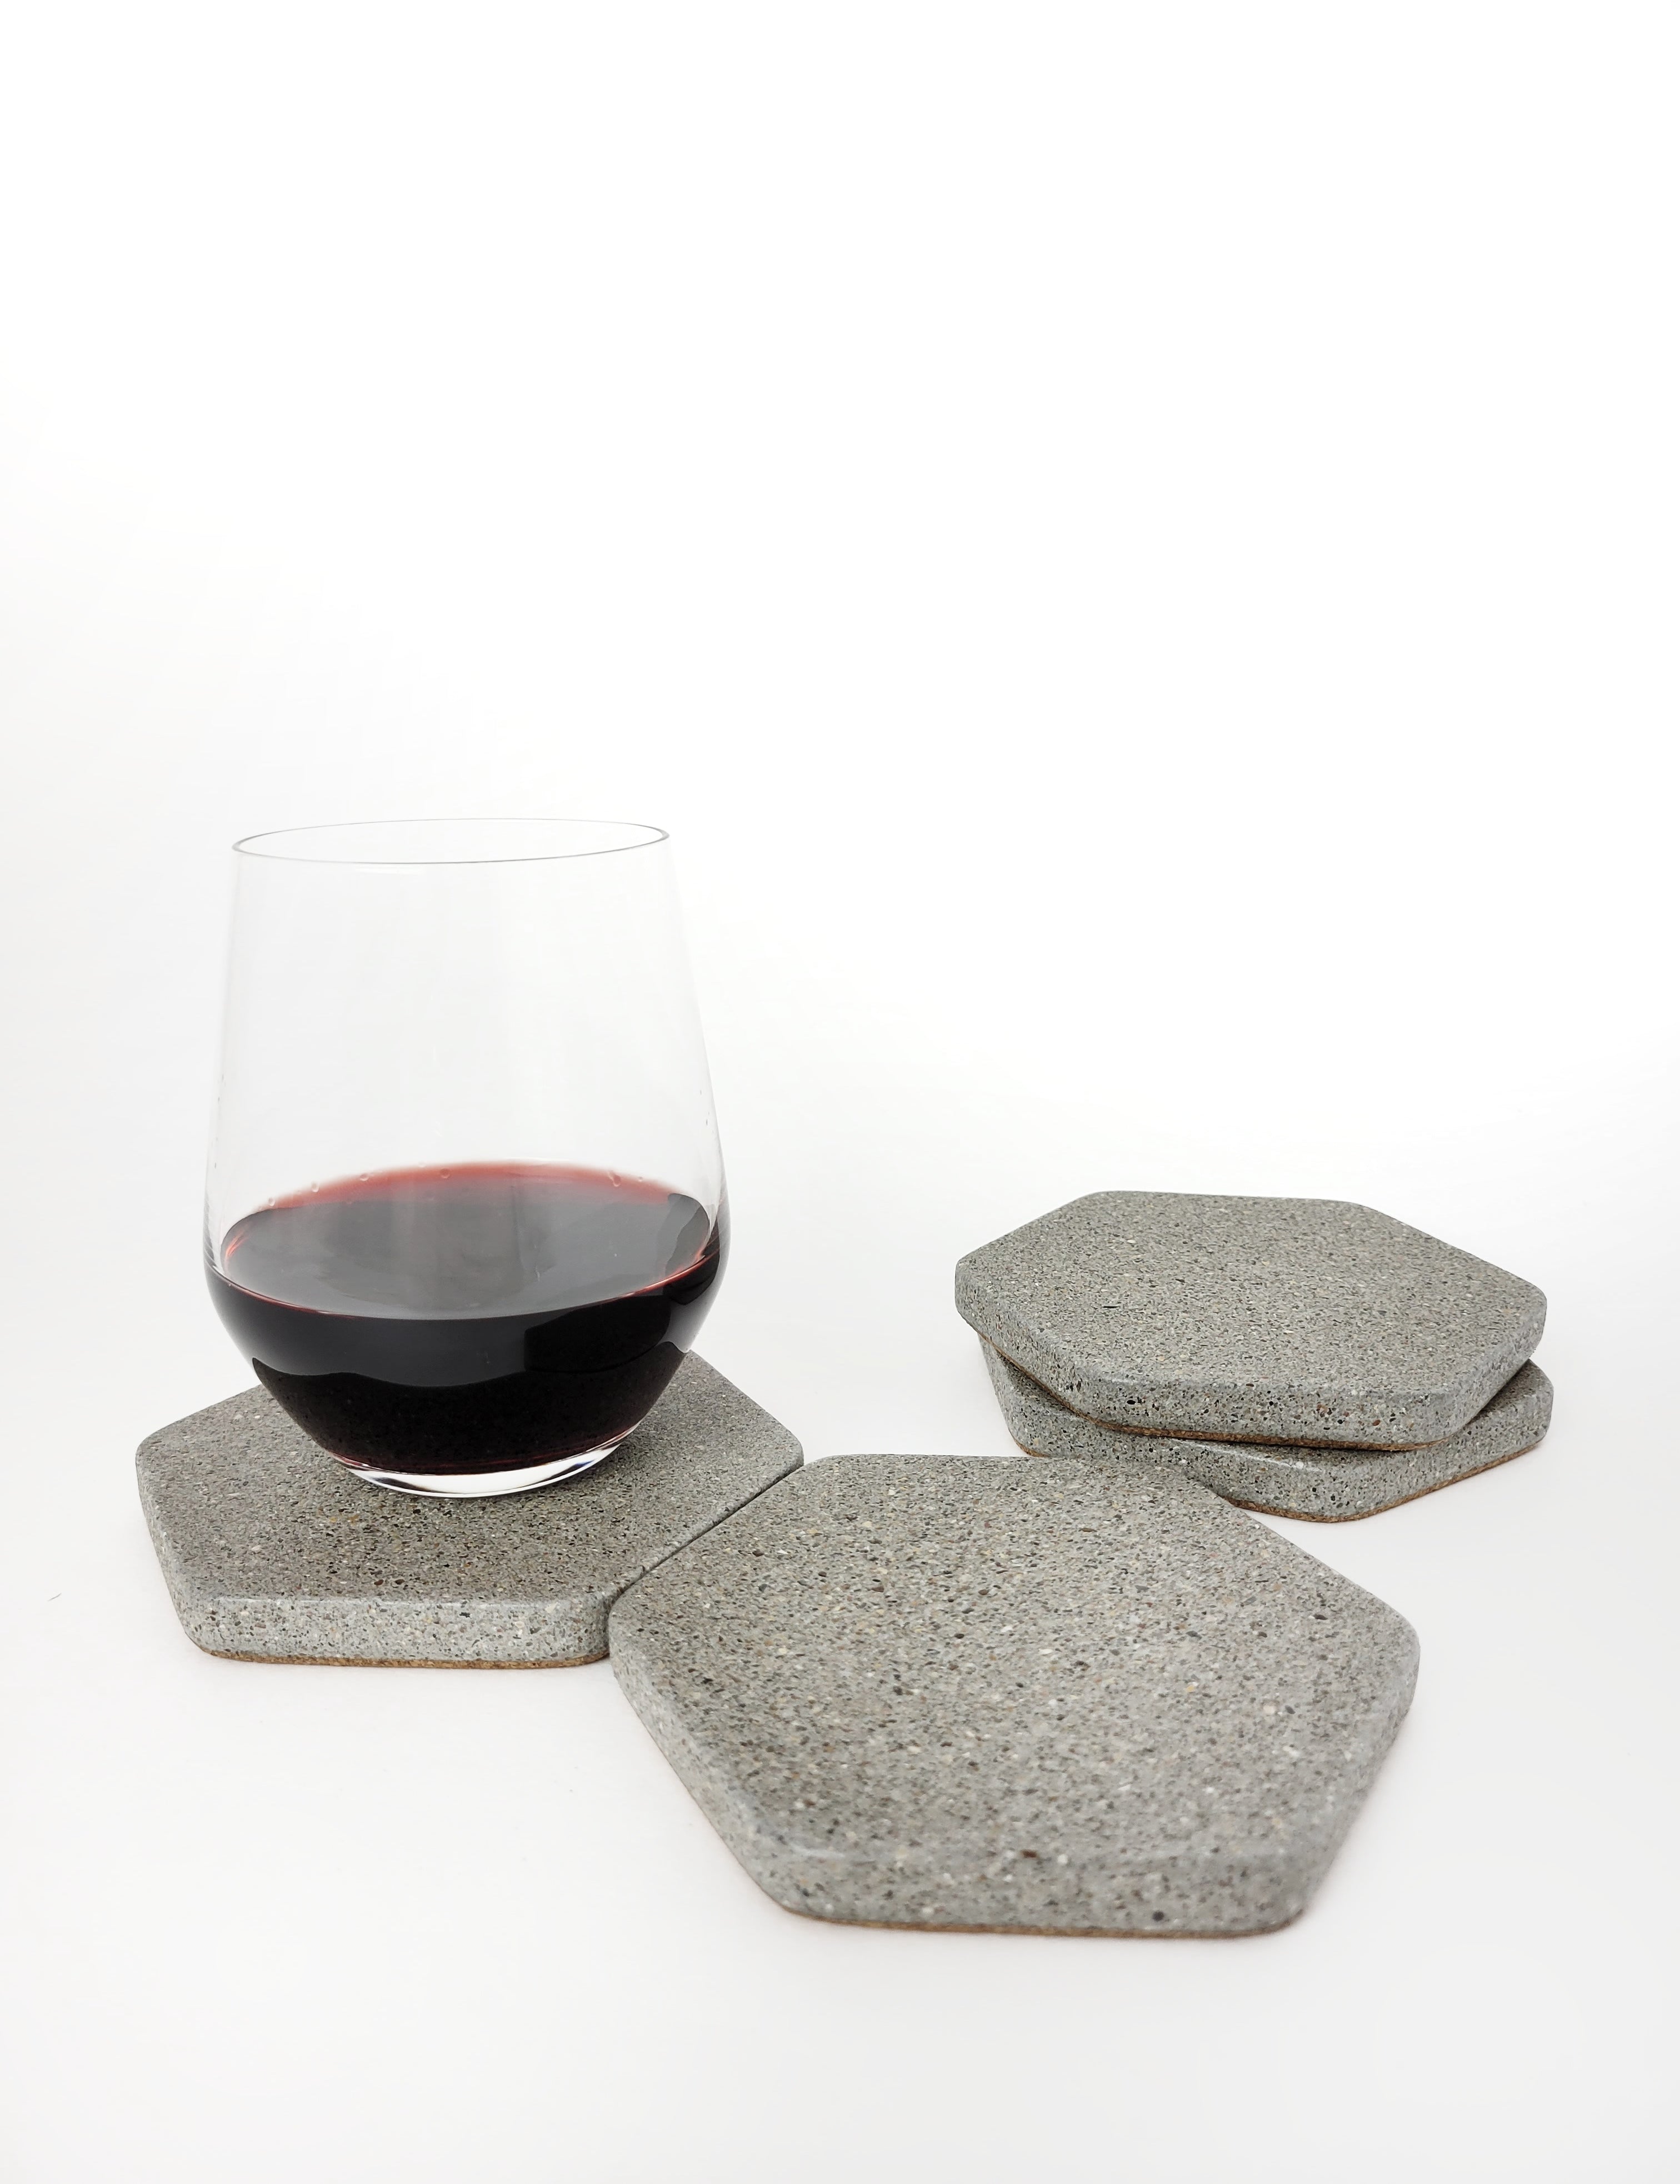 Four grey sandstone concrete hexagon coasters displayed with a glass of red wine.